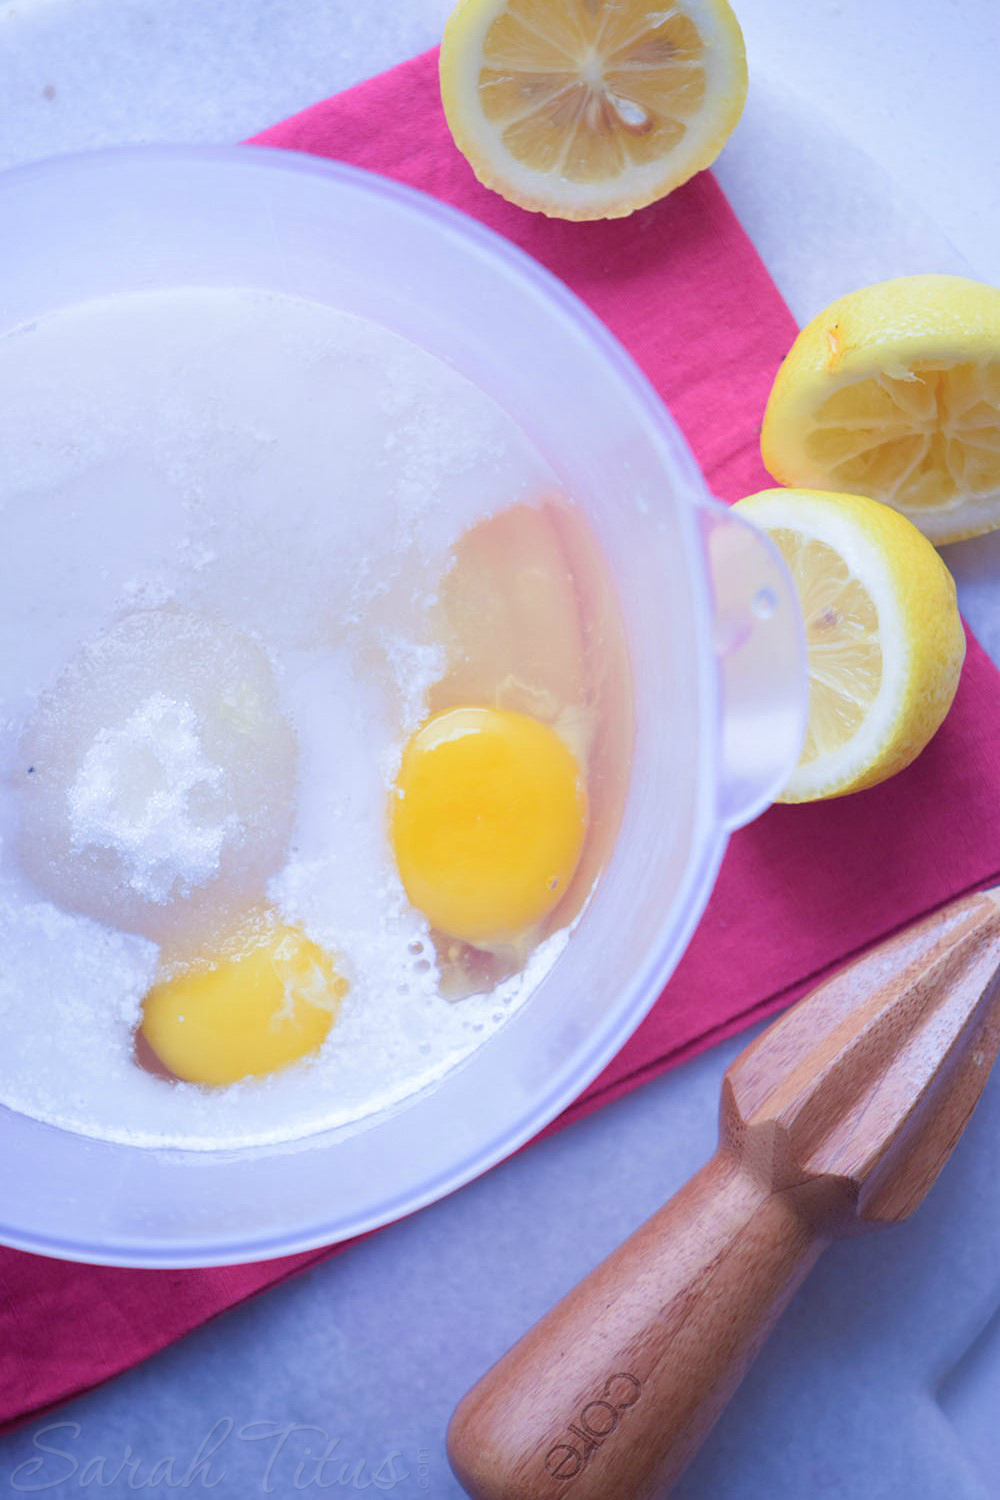 Plastic bowl with cracked eggs, sugar, milk, and lemon juice with fresh cut lemons on the side